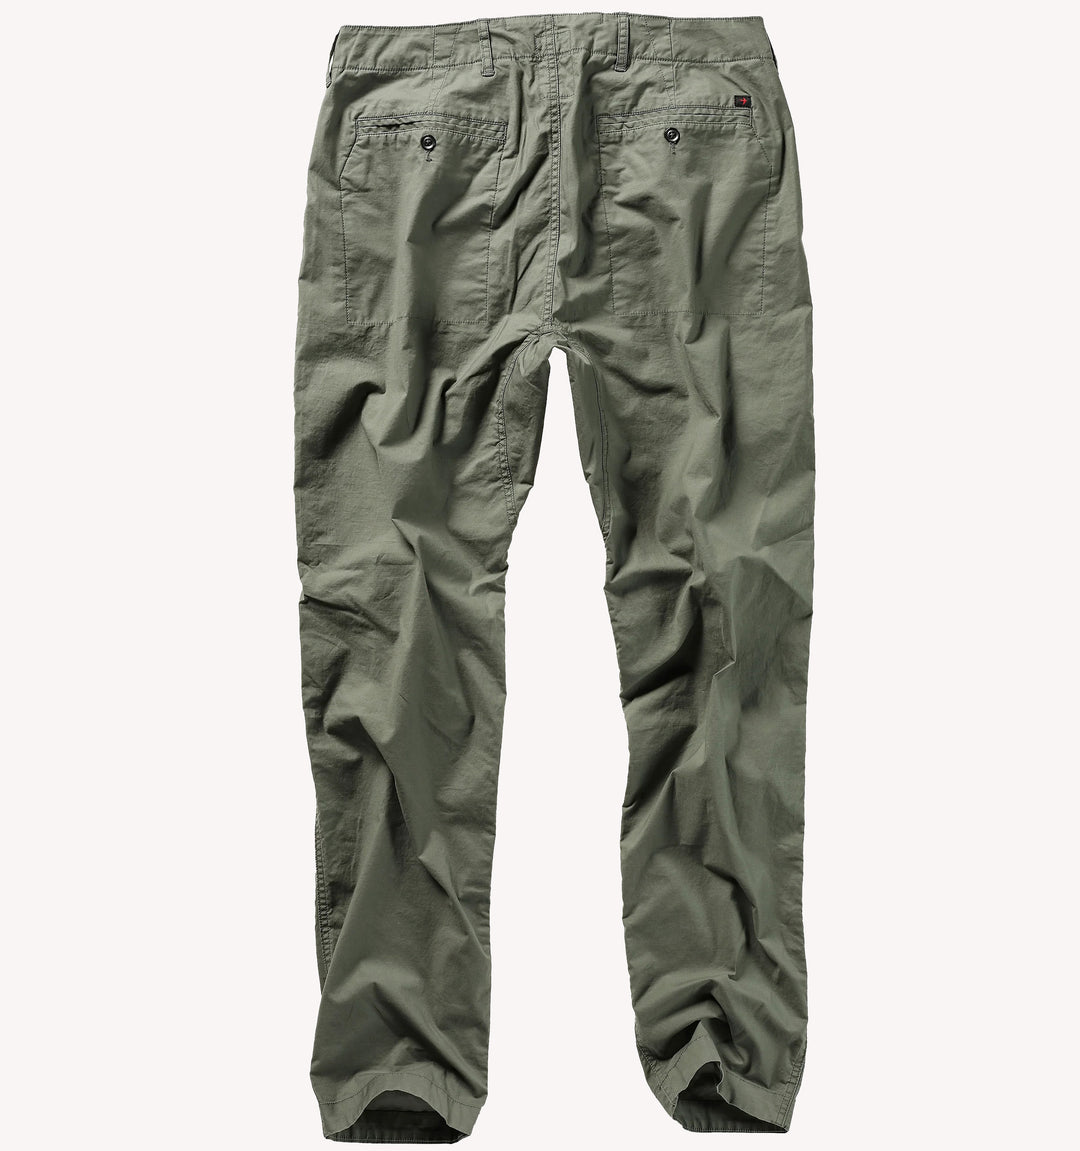 Relwen Flyweight Flex Chino Sport Pant in Muted Olive